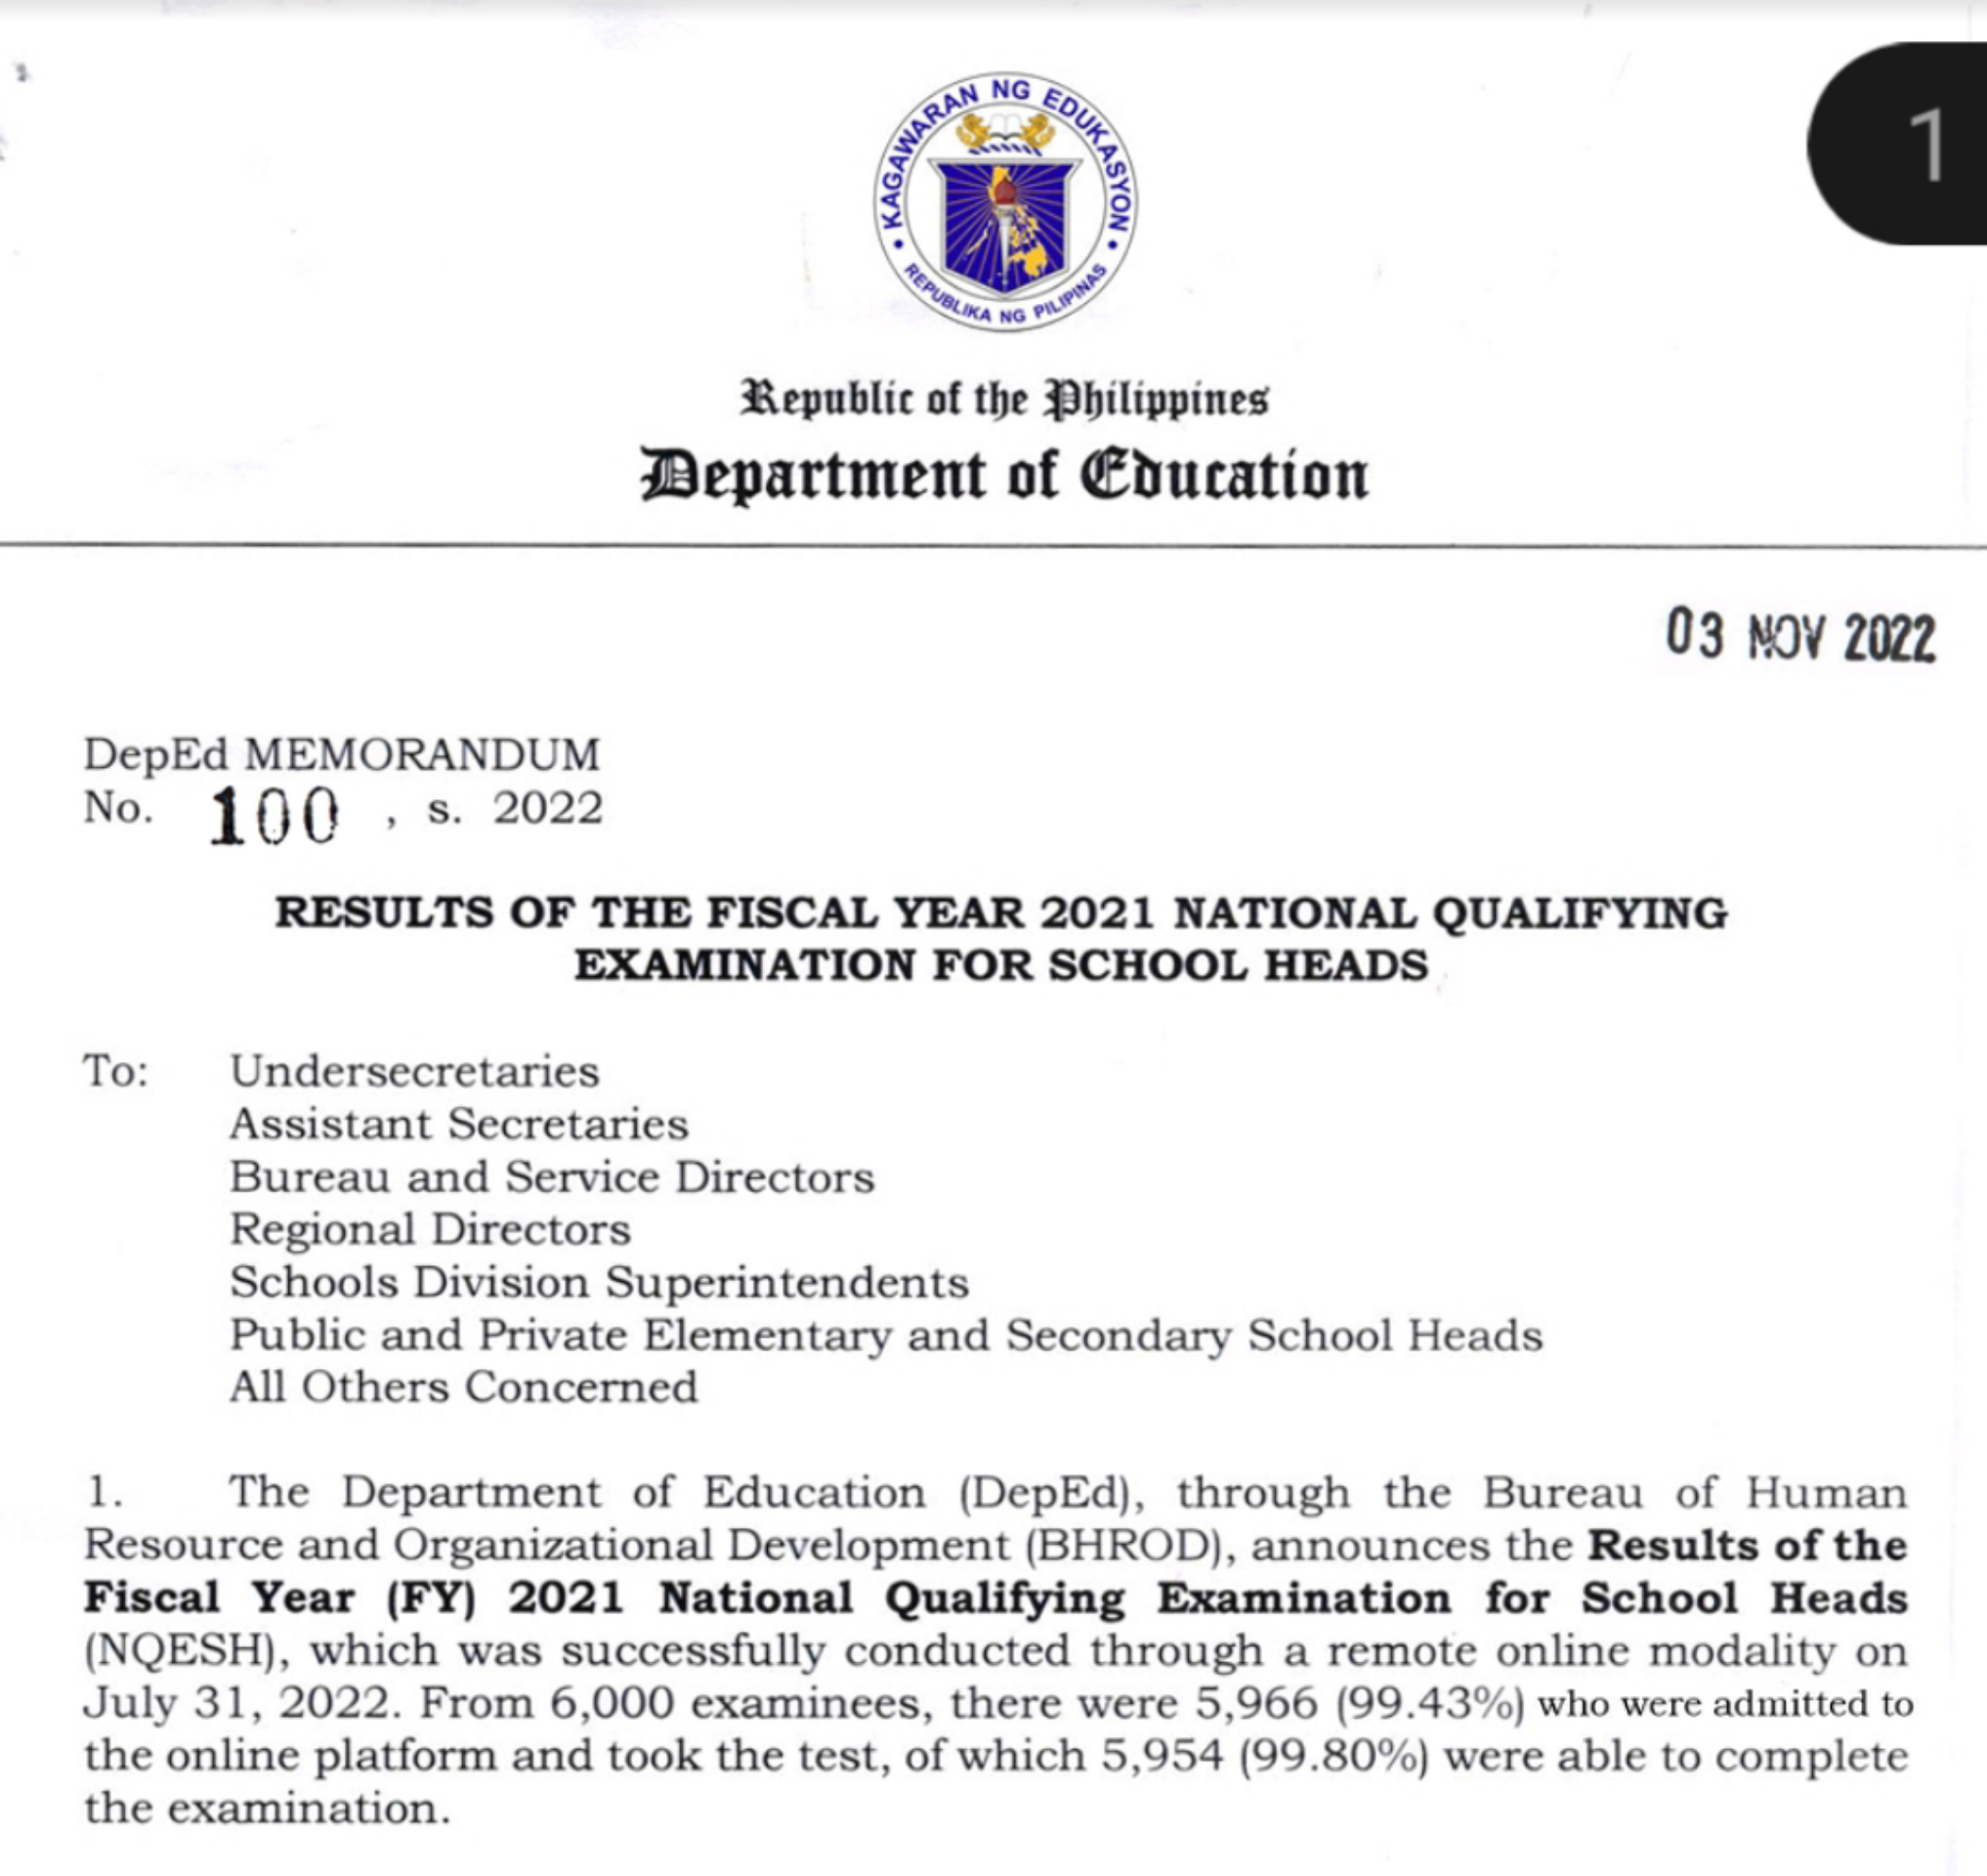 DEPED 2021 RESULTS OF THE FISCAL YEAR 2021 NATIONAL QUALIFYING